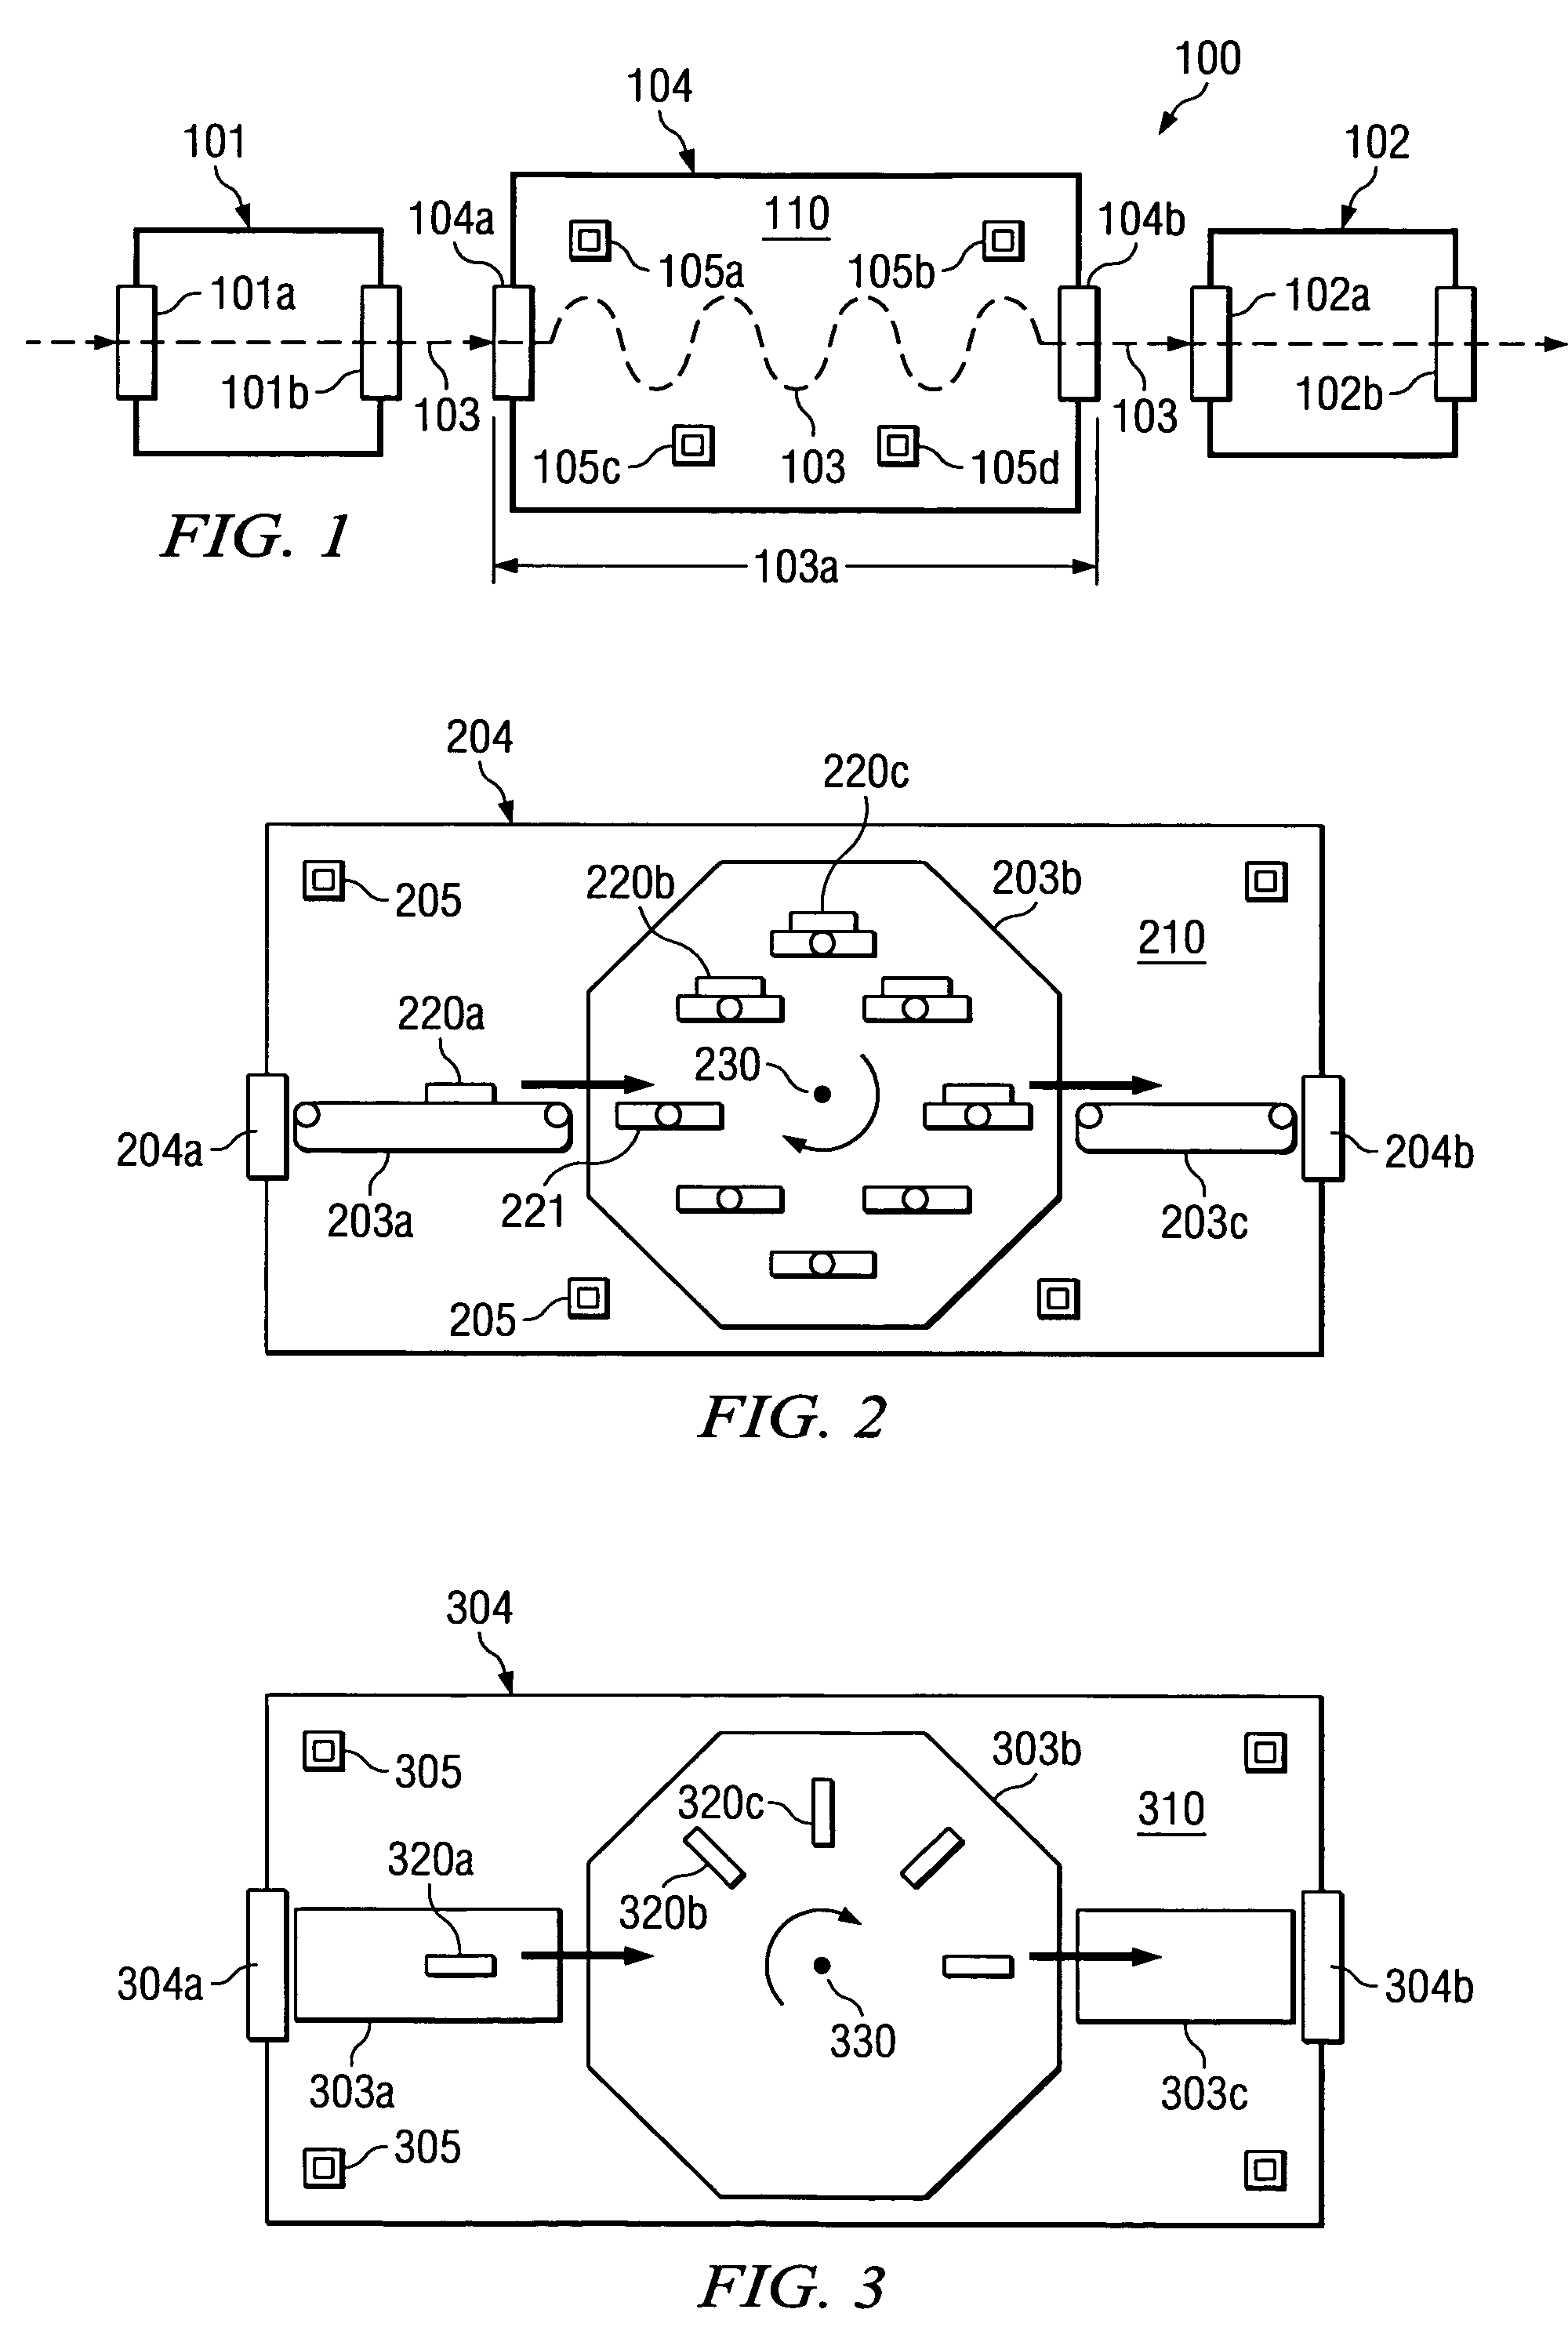 Manufacturing system and apparatus for balanced product flow with application to low-stress underfilling of flip-chip electronic devices